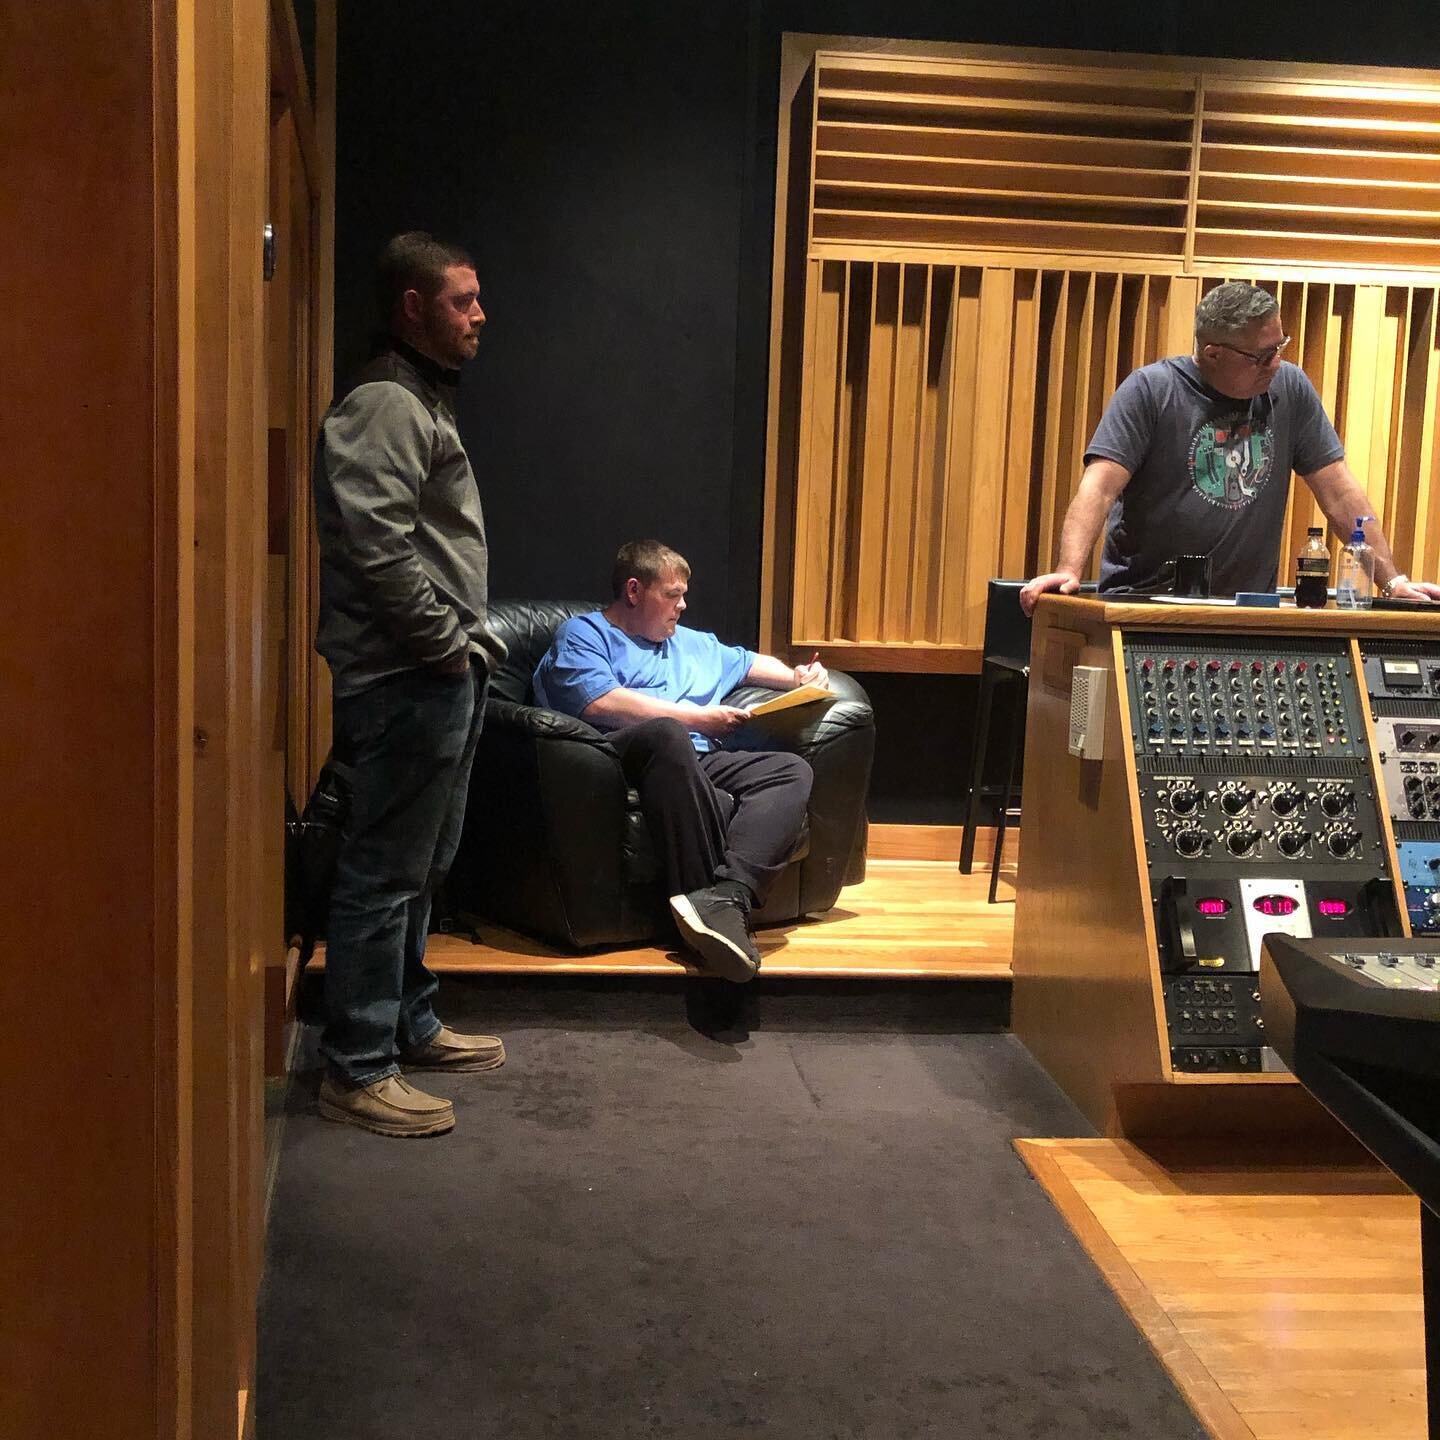 New music coming from K&amp;A Smith band. #bluegrass #kasb #knasmith #studio